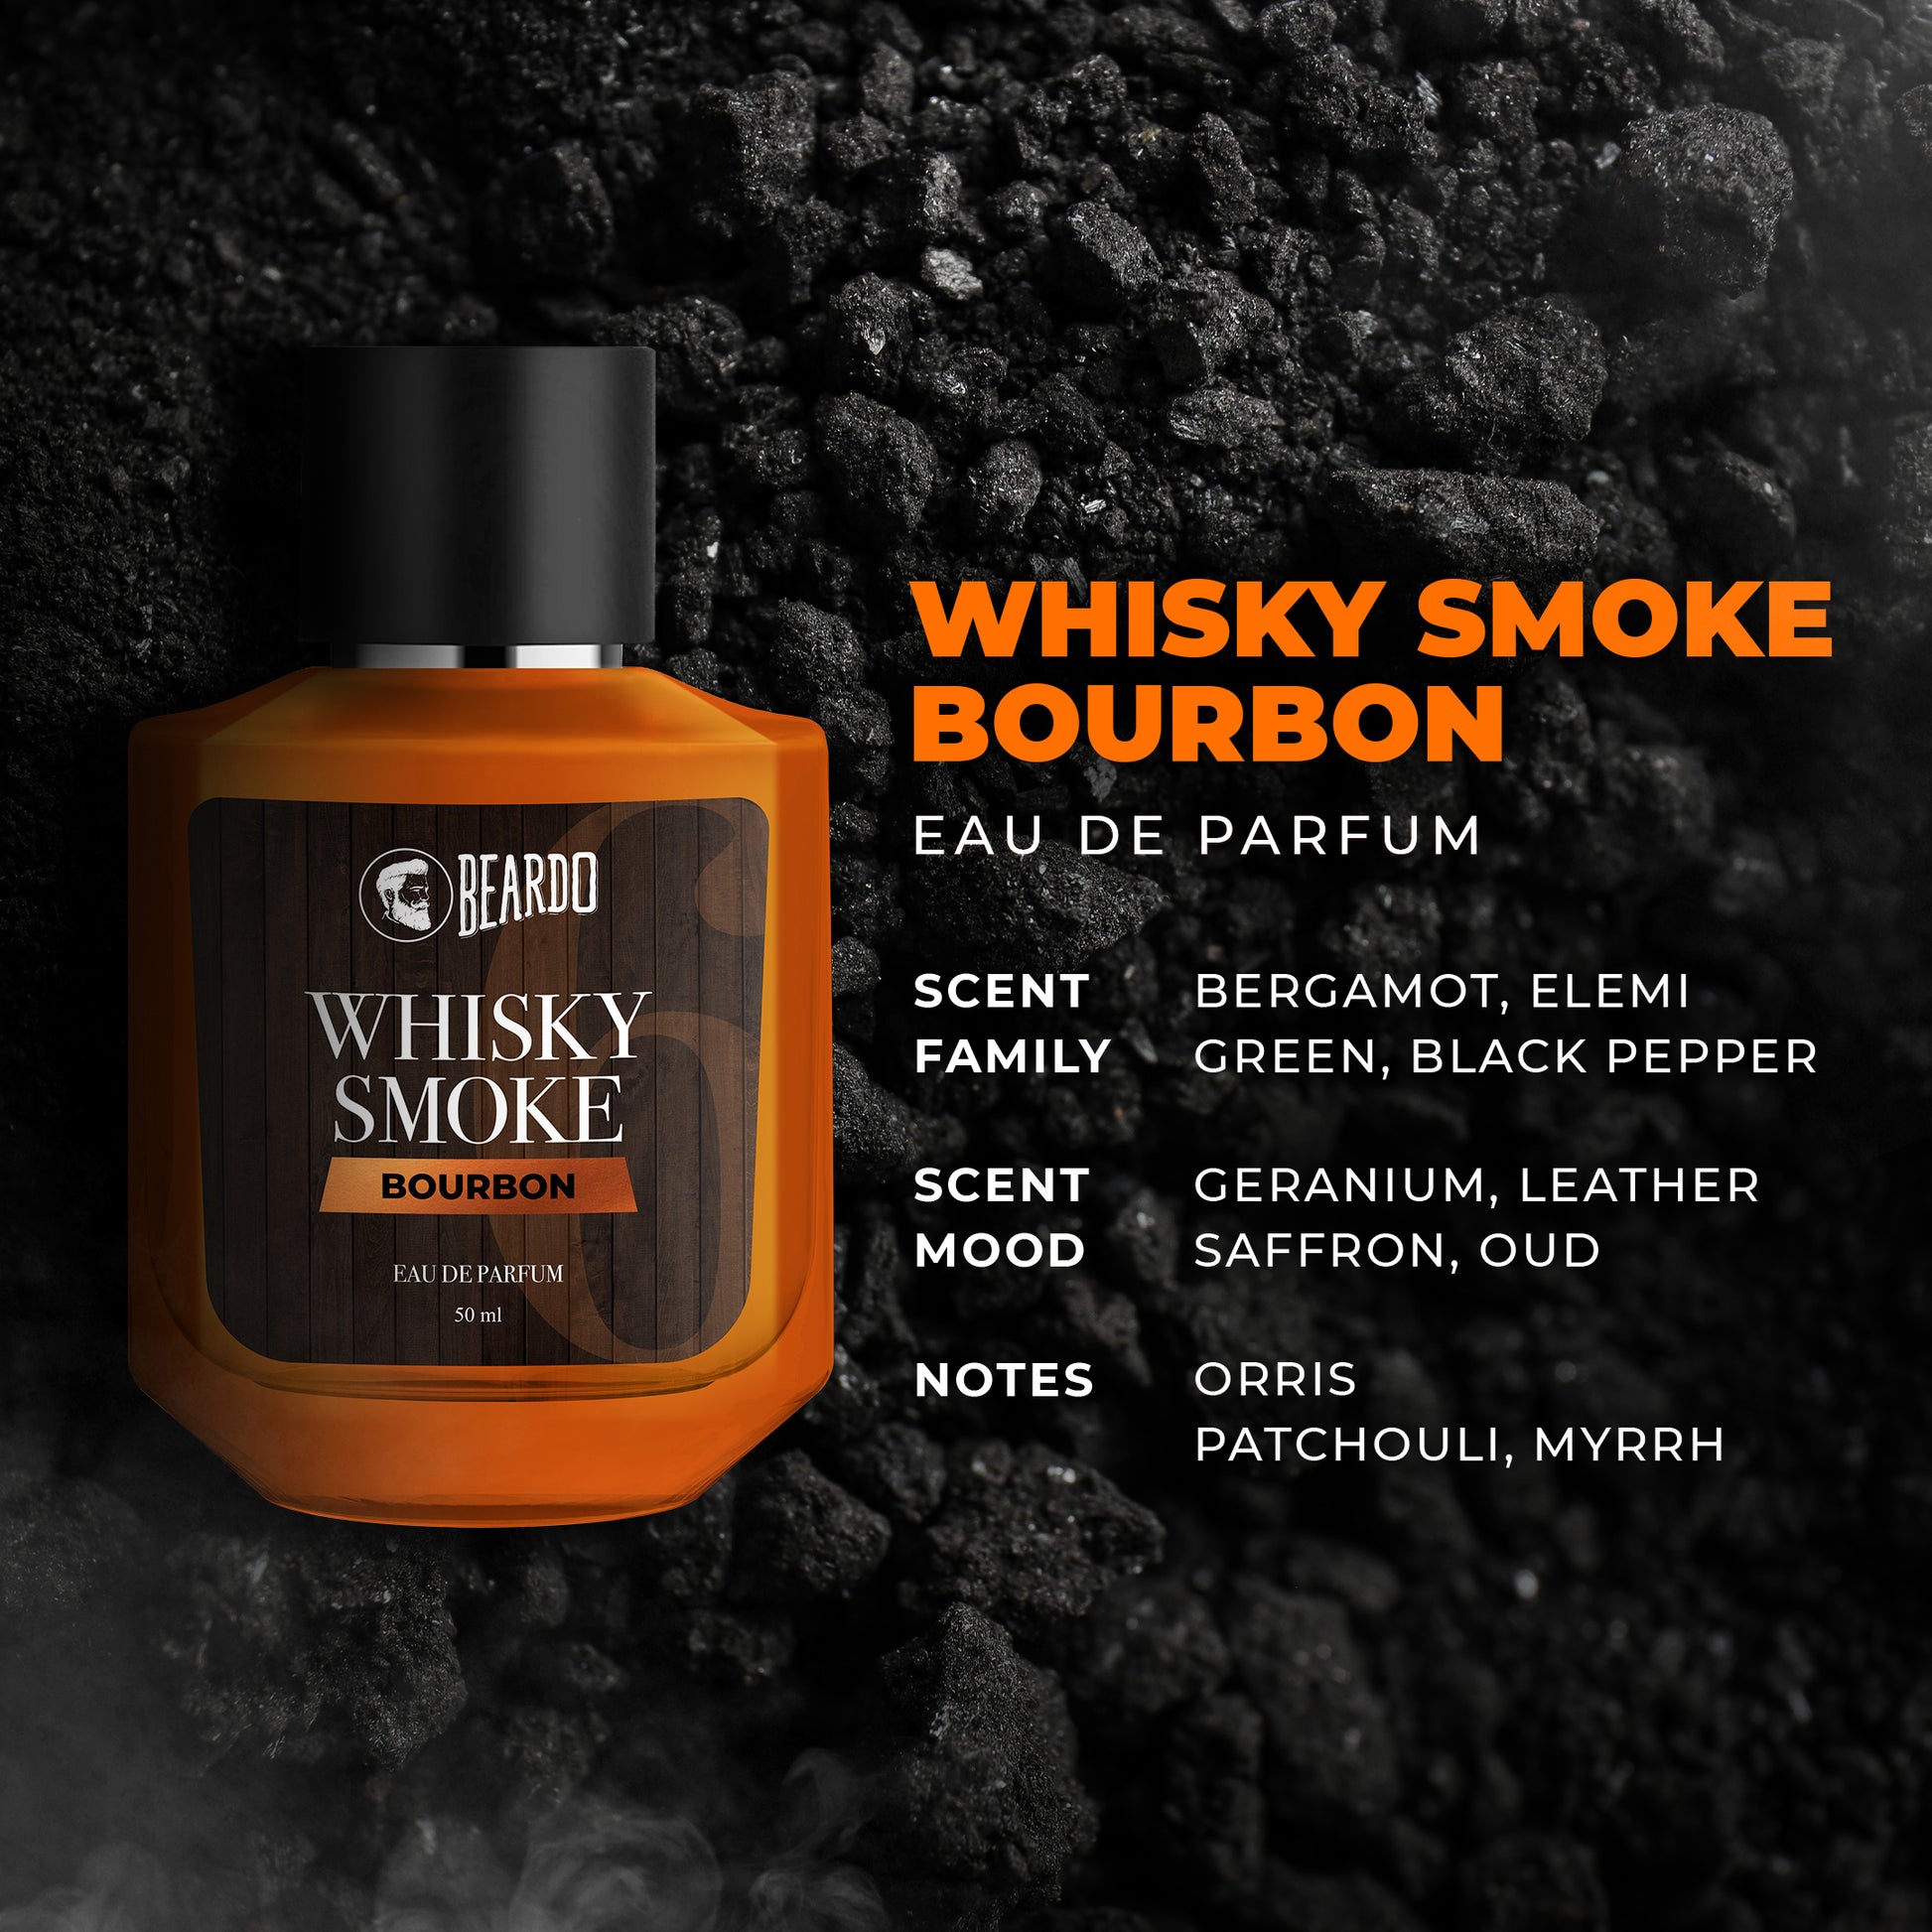 woody notes, woody fragrance, oud, patchouli, black peer, What is EDP in perfume? How does Beardo whiskey smoke smell?